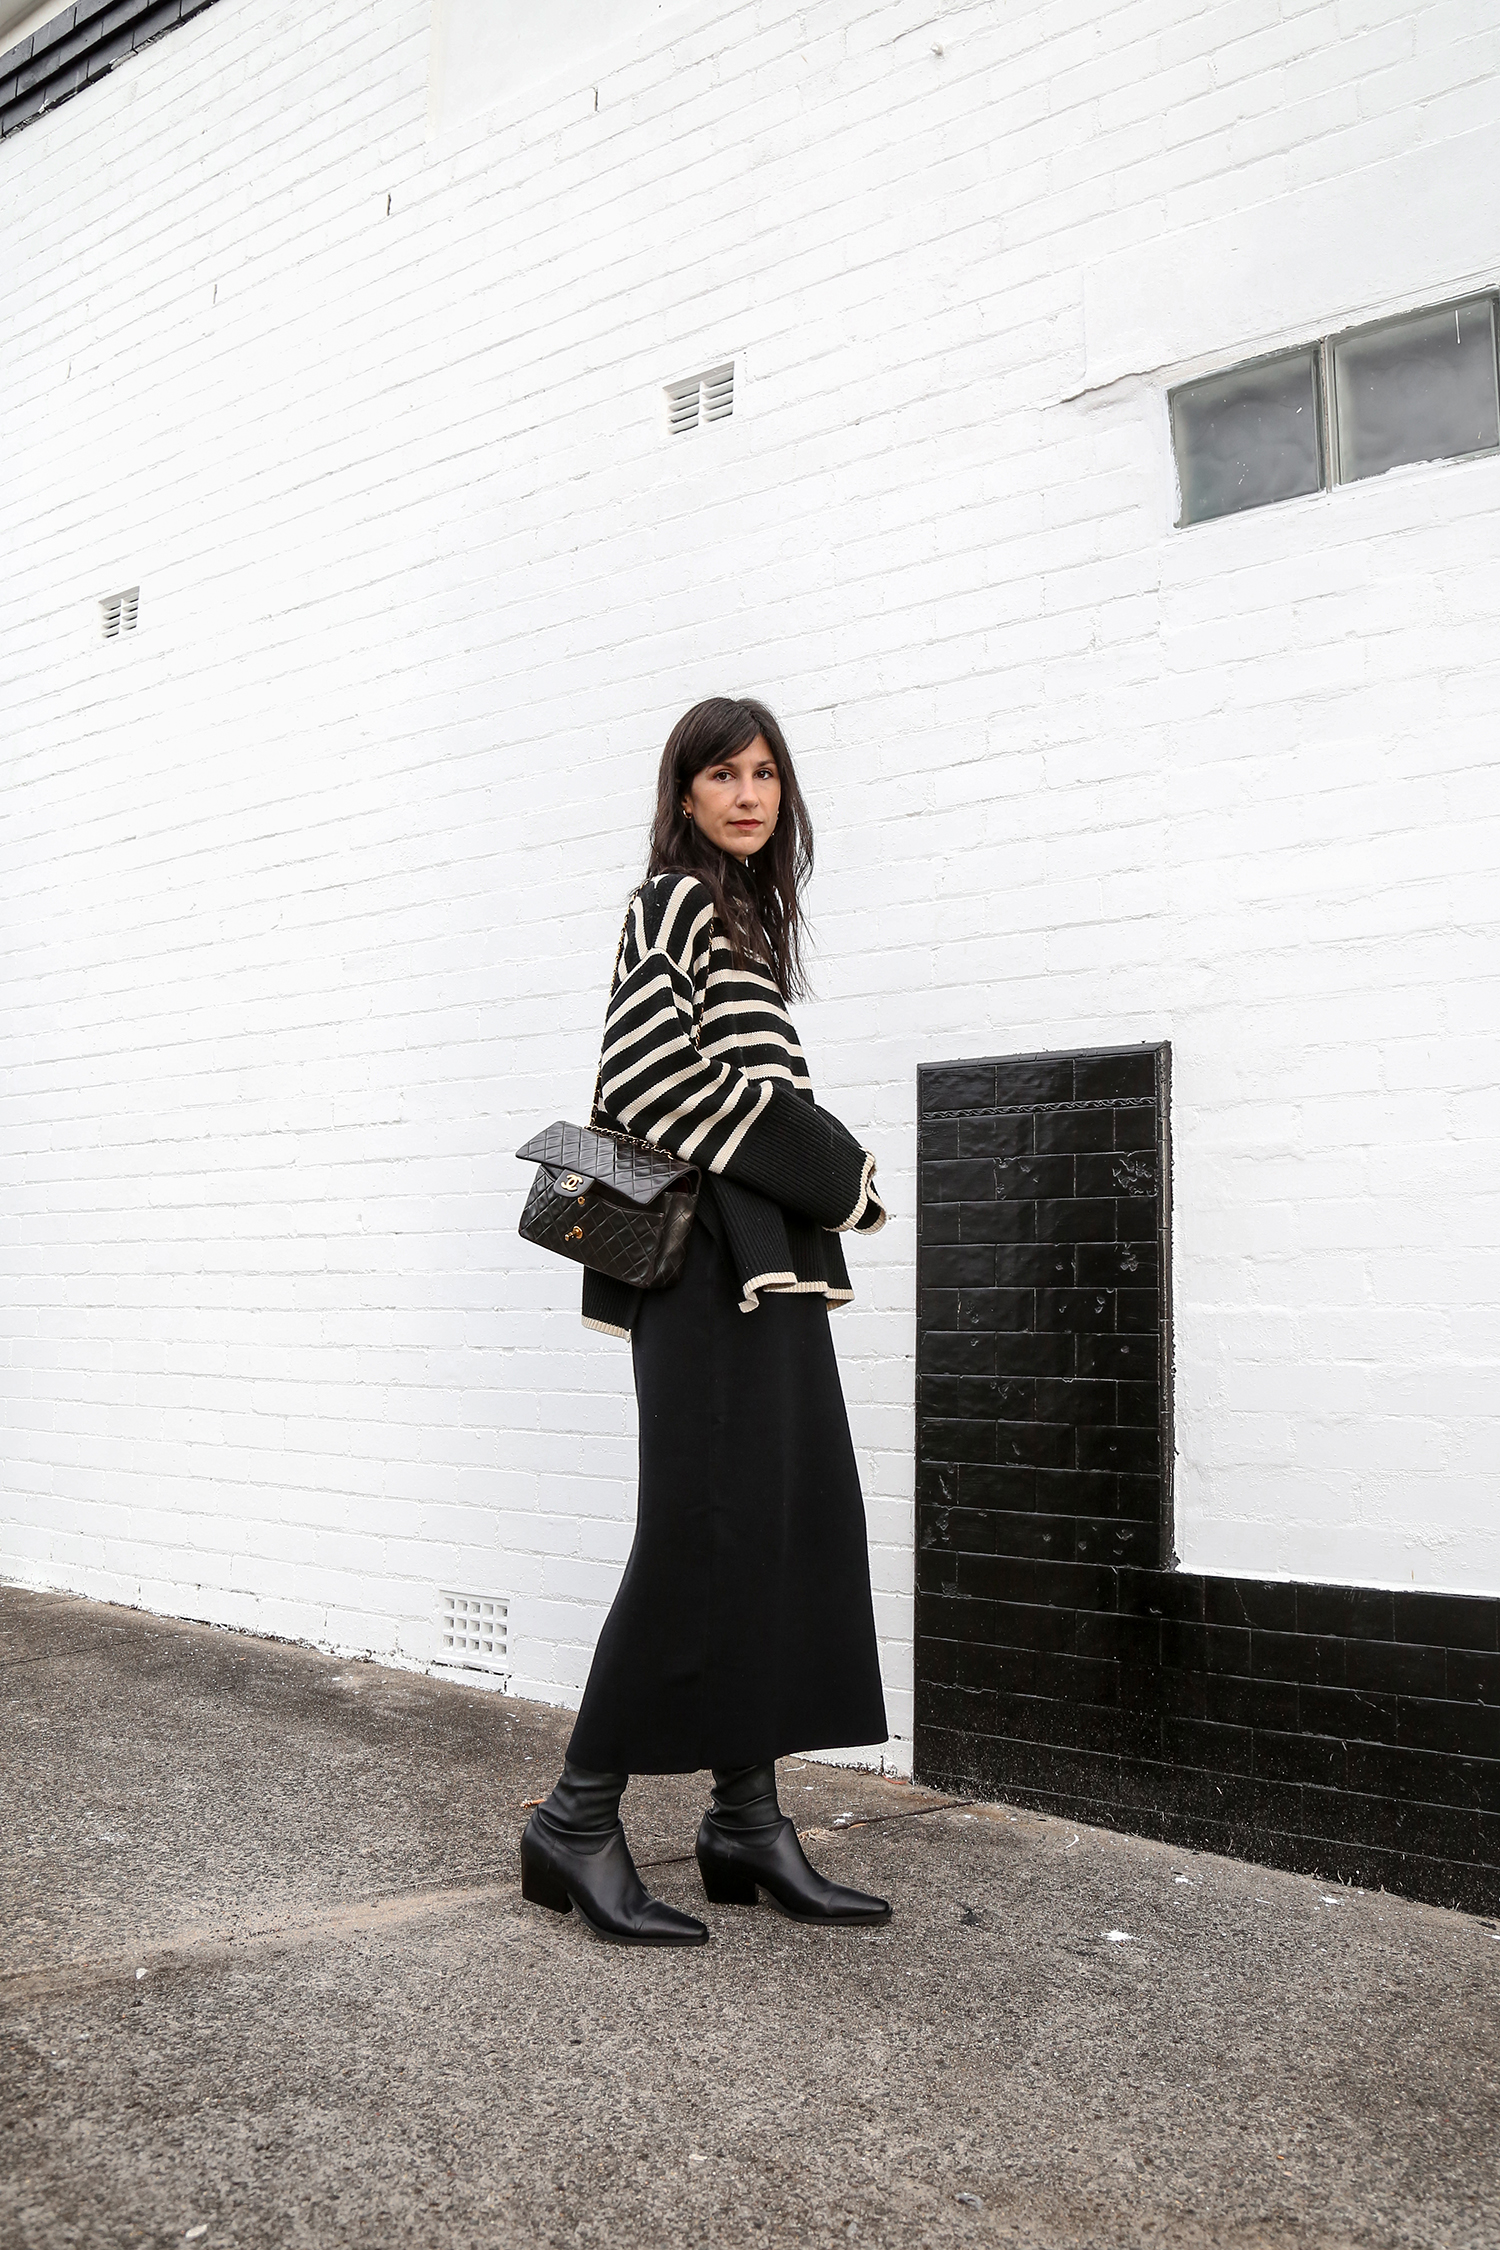 Wearing Toteme striped knit with Deiji Studios skirt and Arket boots